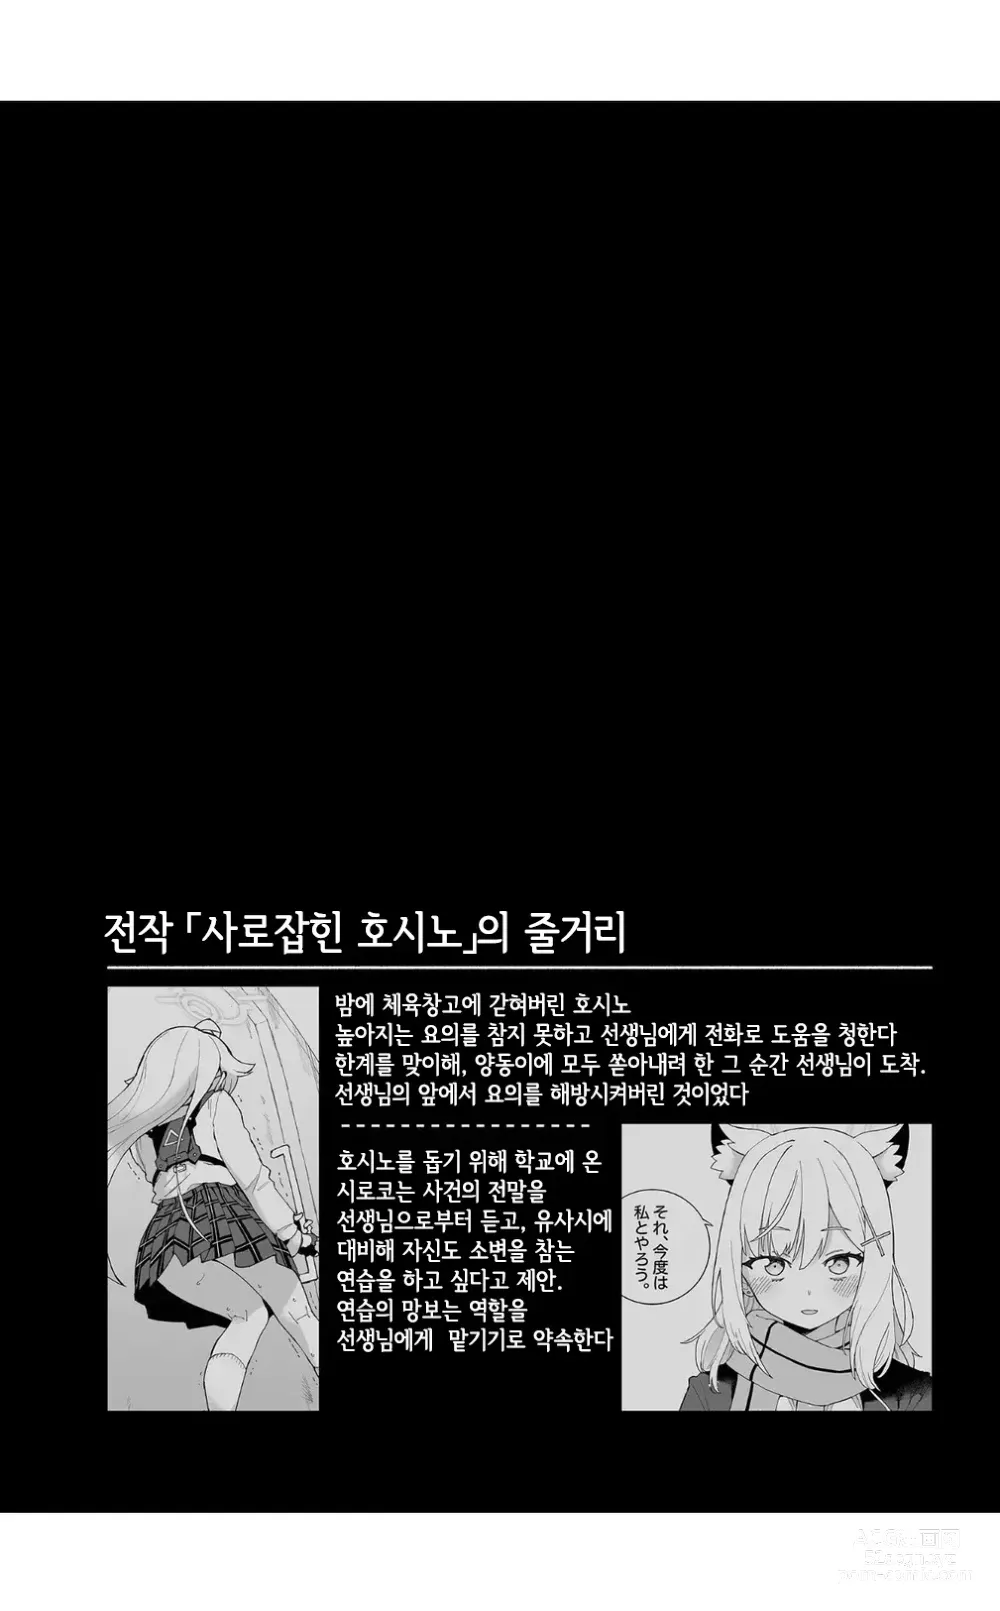 Page 3 of doujinshi 늑대의 물